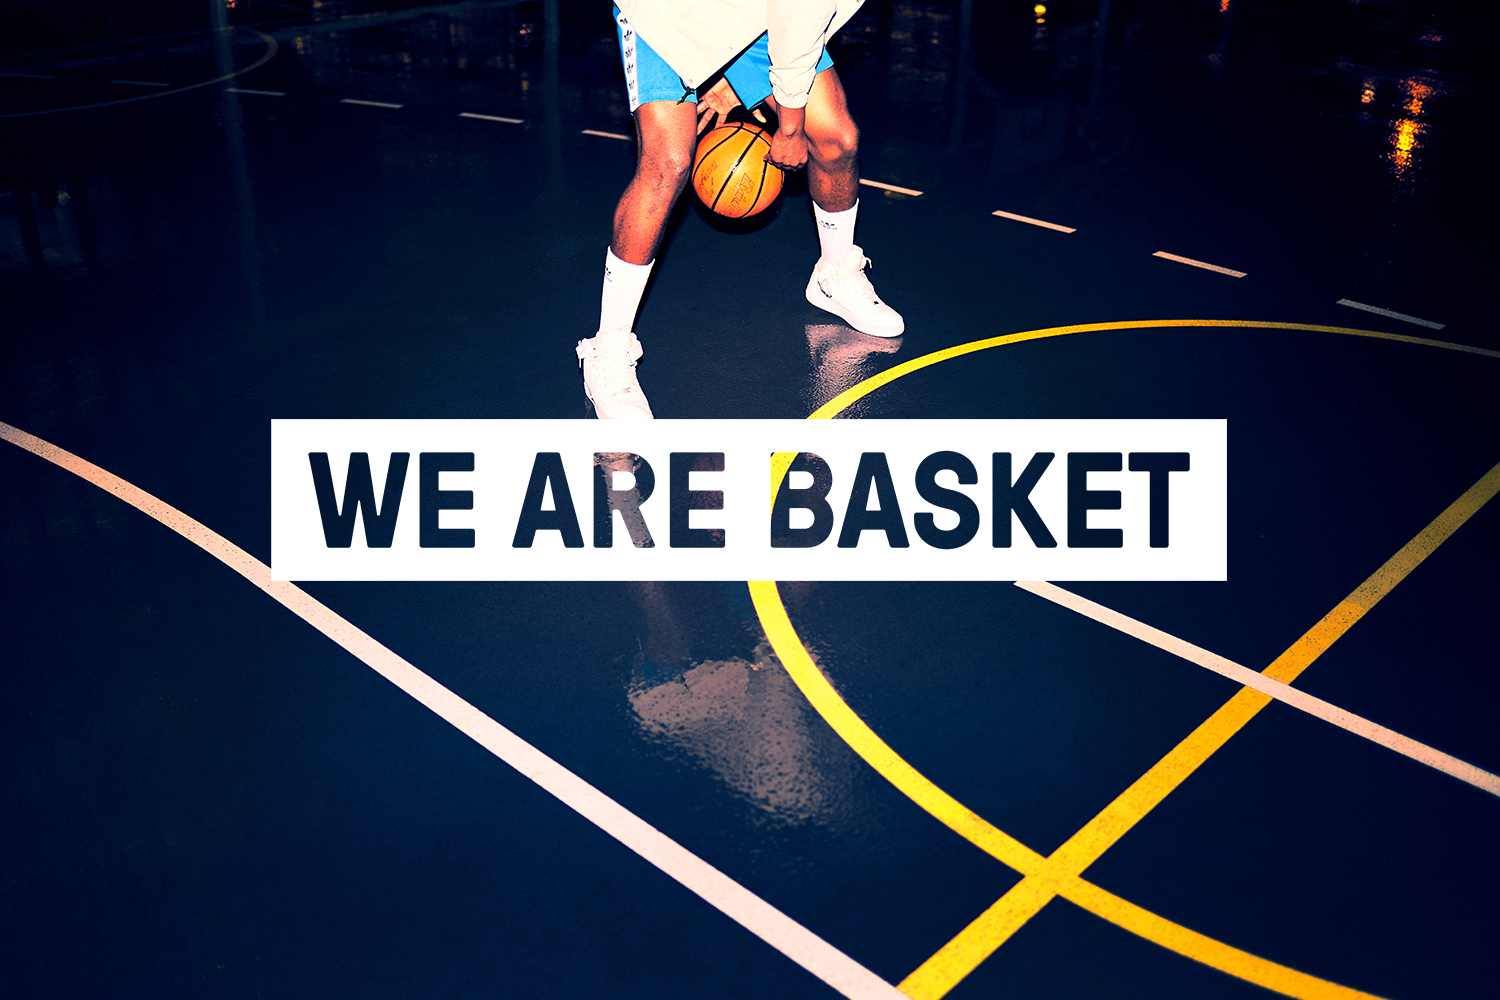 We Are Basket